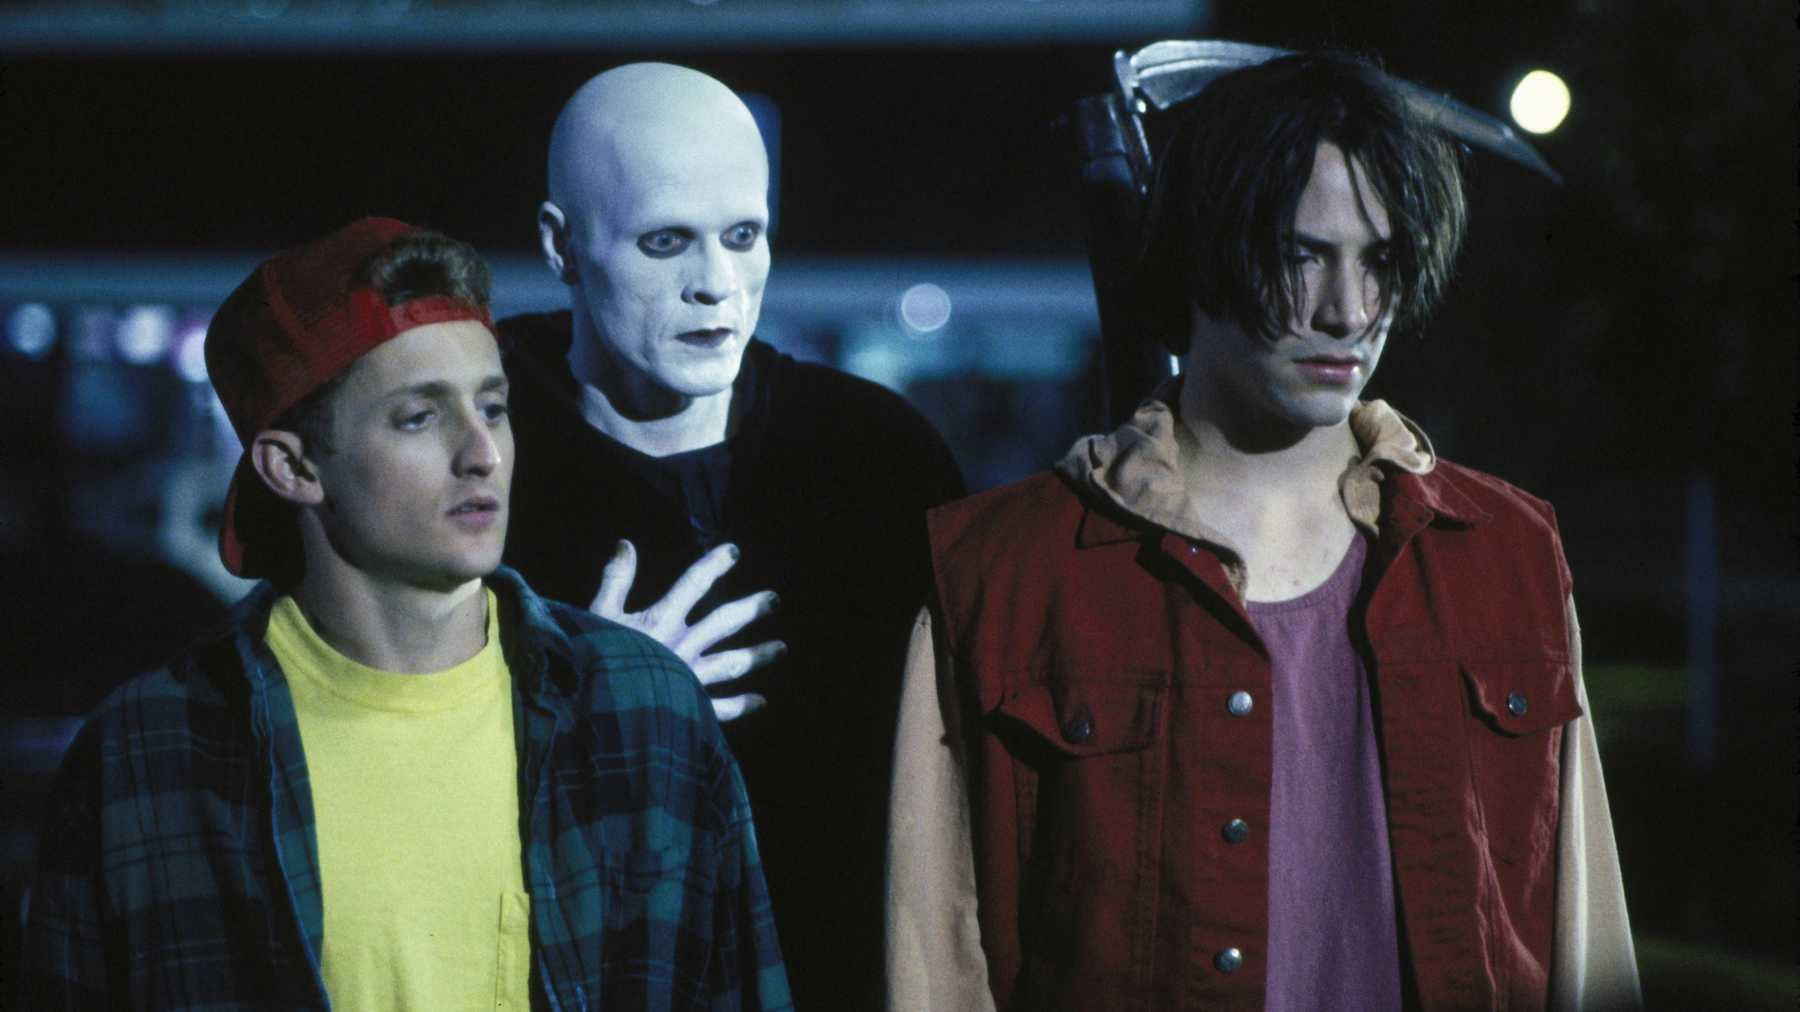 Bill & Ted's Bogus Journey: Collector's Edition - Limited Edition SteelBook